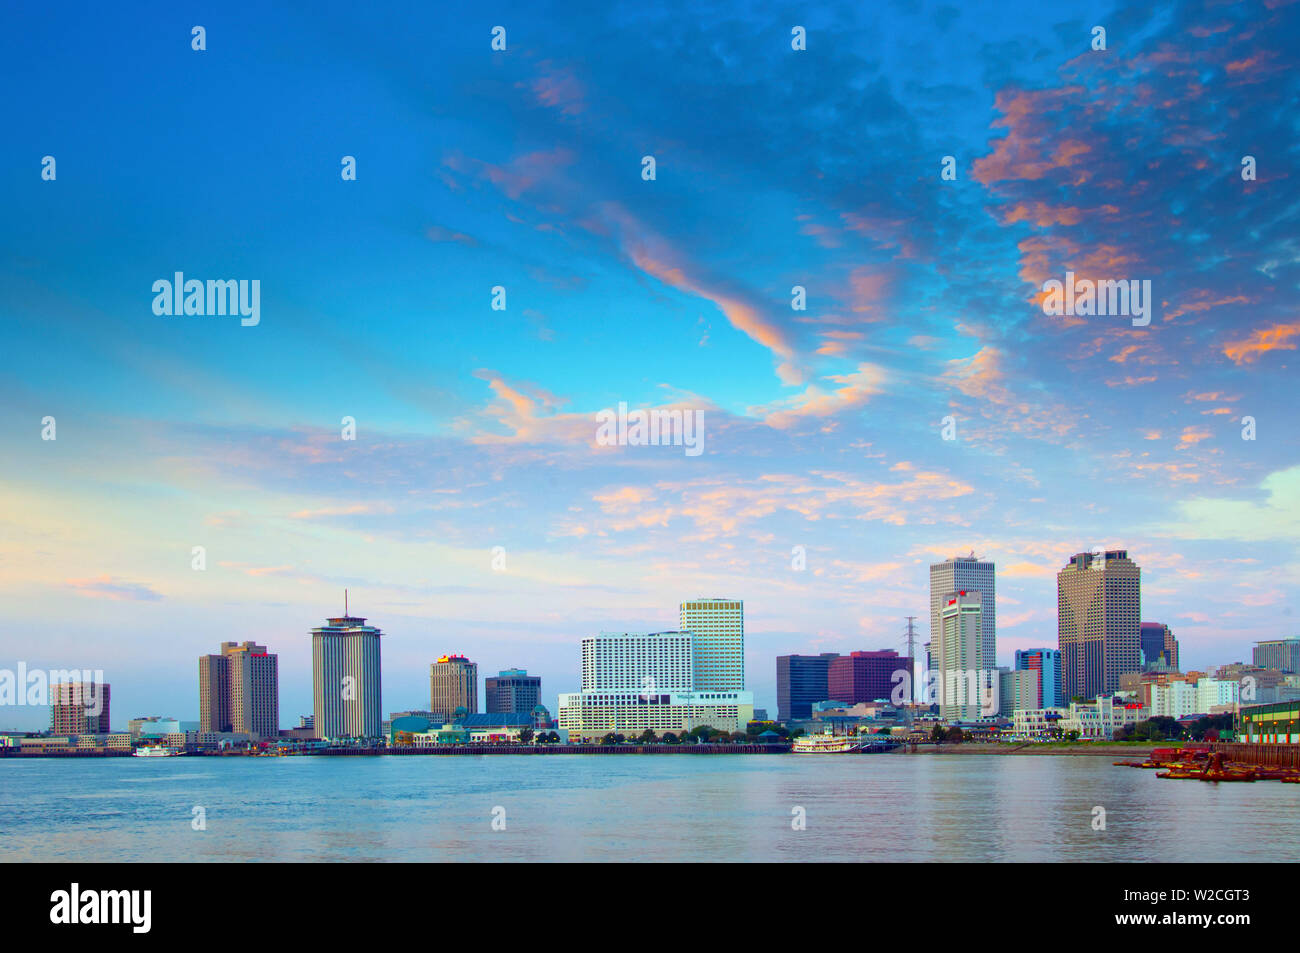 Louisiana, New Orleans, Mississippi River, View Of New Orleans Skyline Stock Photo